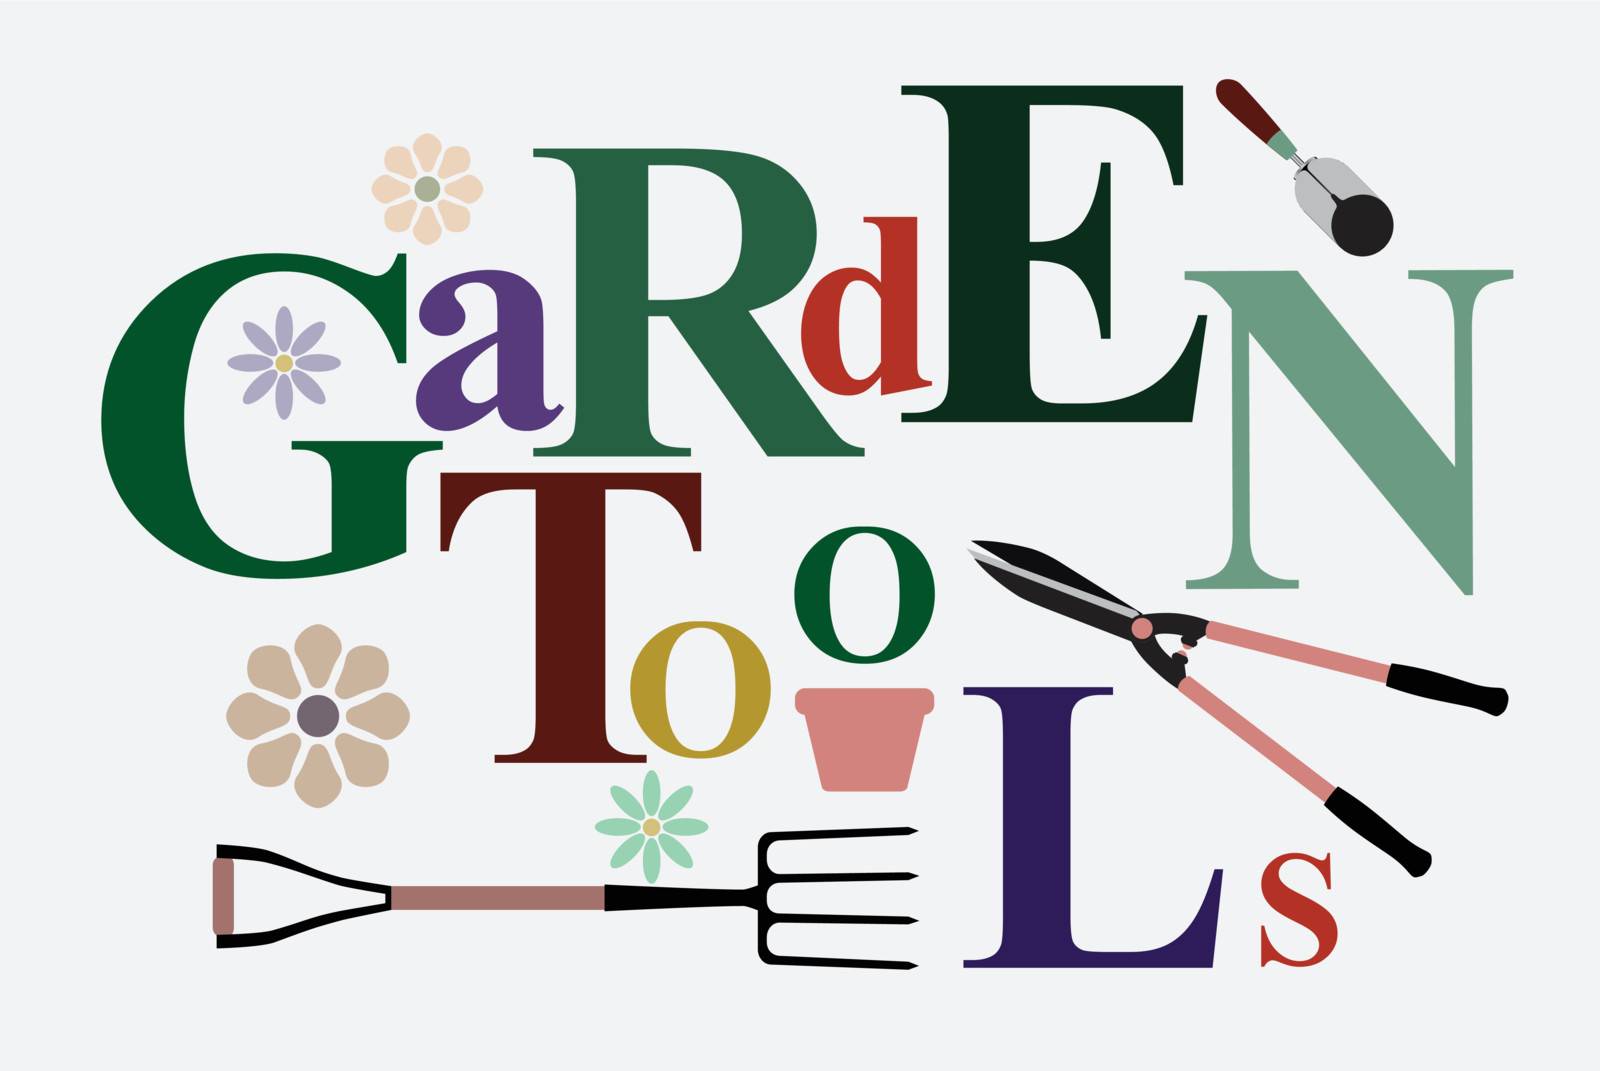 Text Garden Tools in creativity with pitchforks, shovels and clippers. Vector illustration.